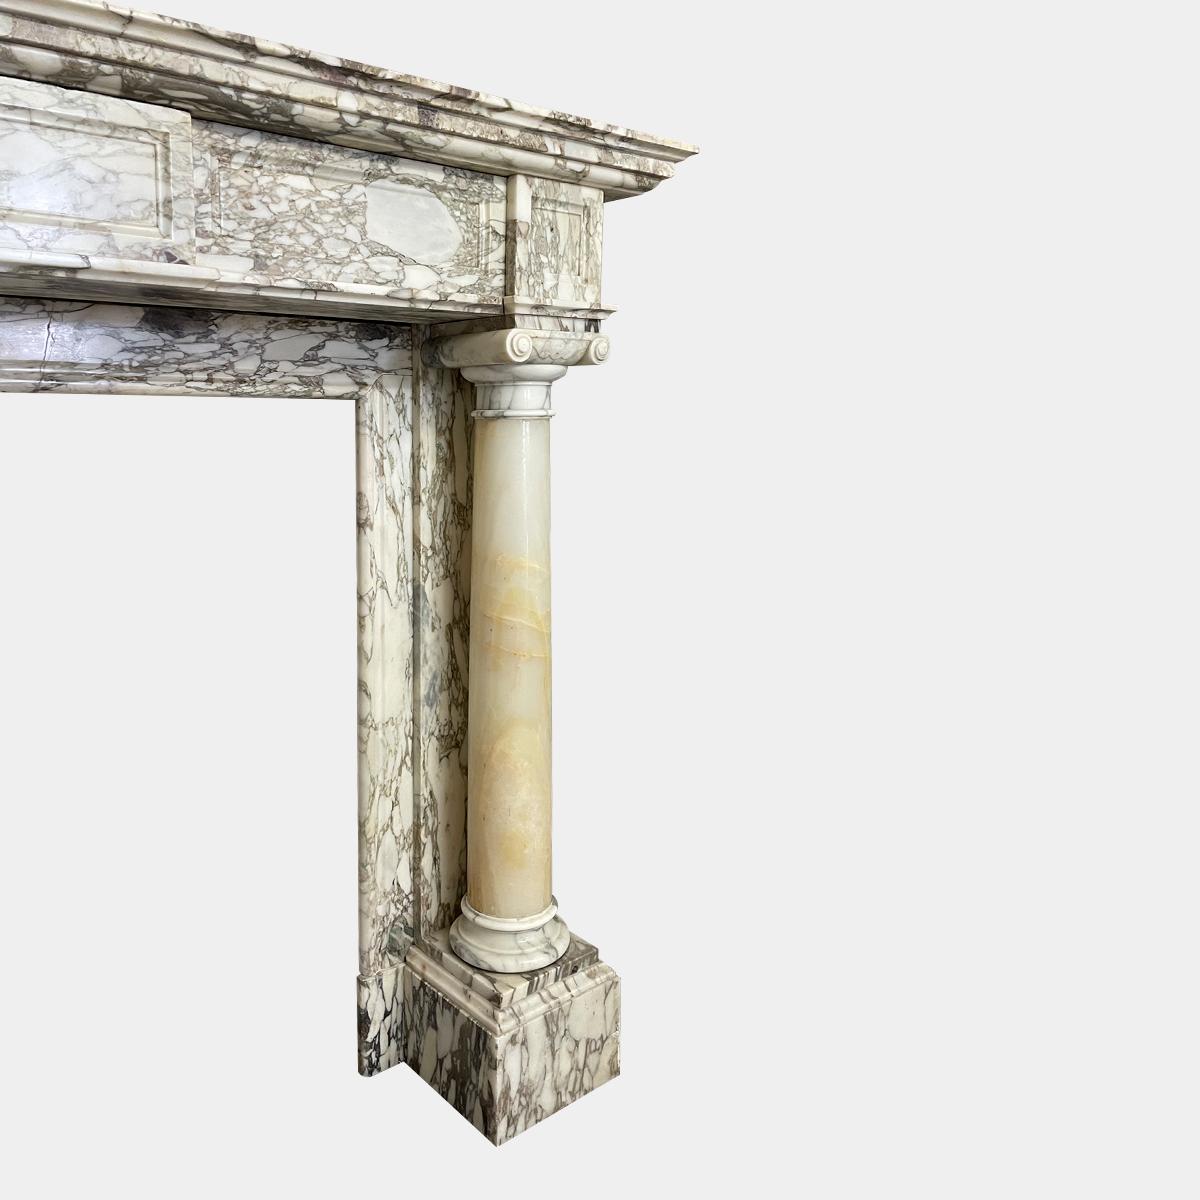 Napoleon III Antique French Columned Fireplace Mantel in Breche Marble